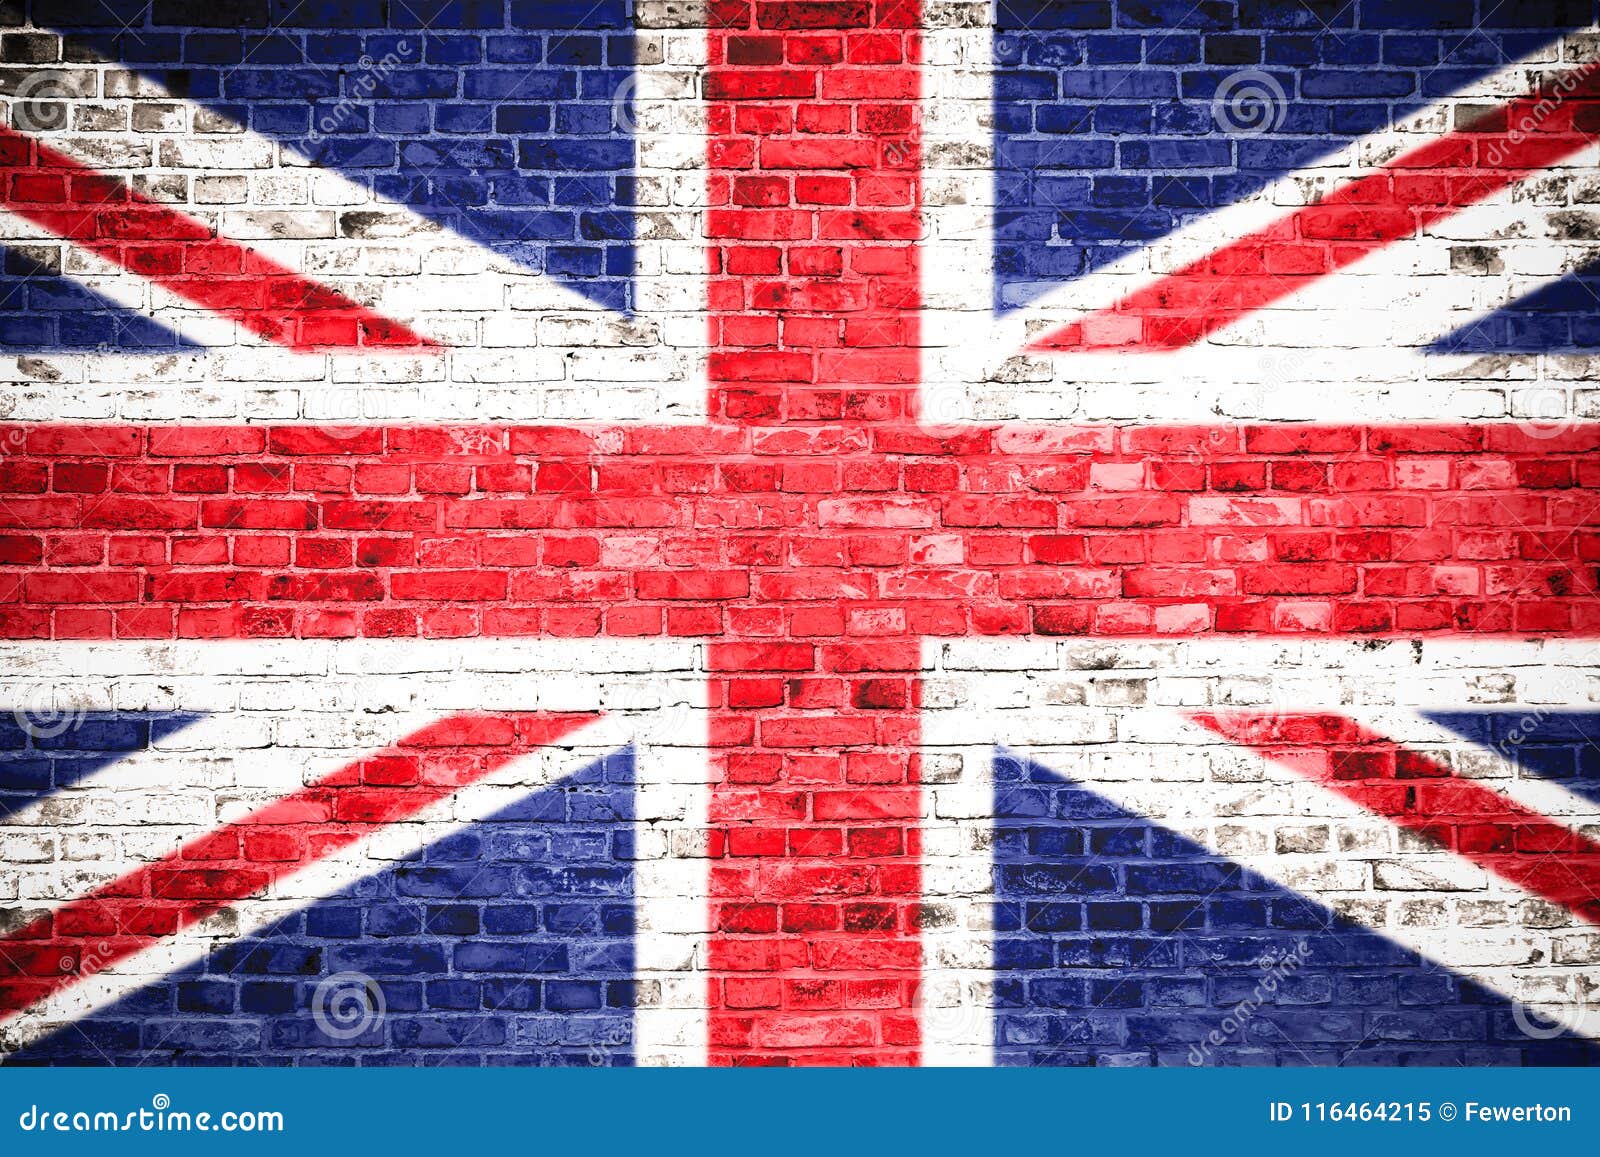 United Kingdom Uk Flag Painted On A Brick Wall Concept Image For Great